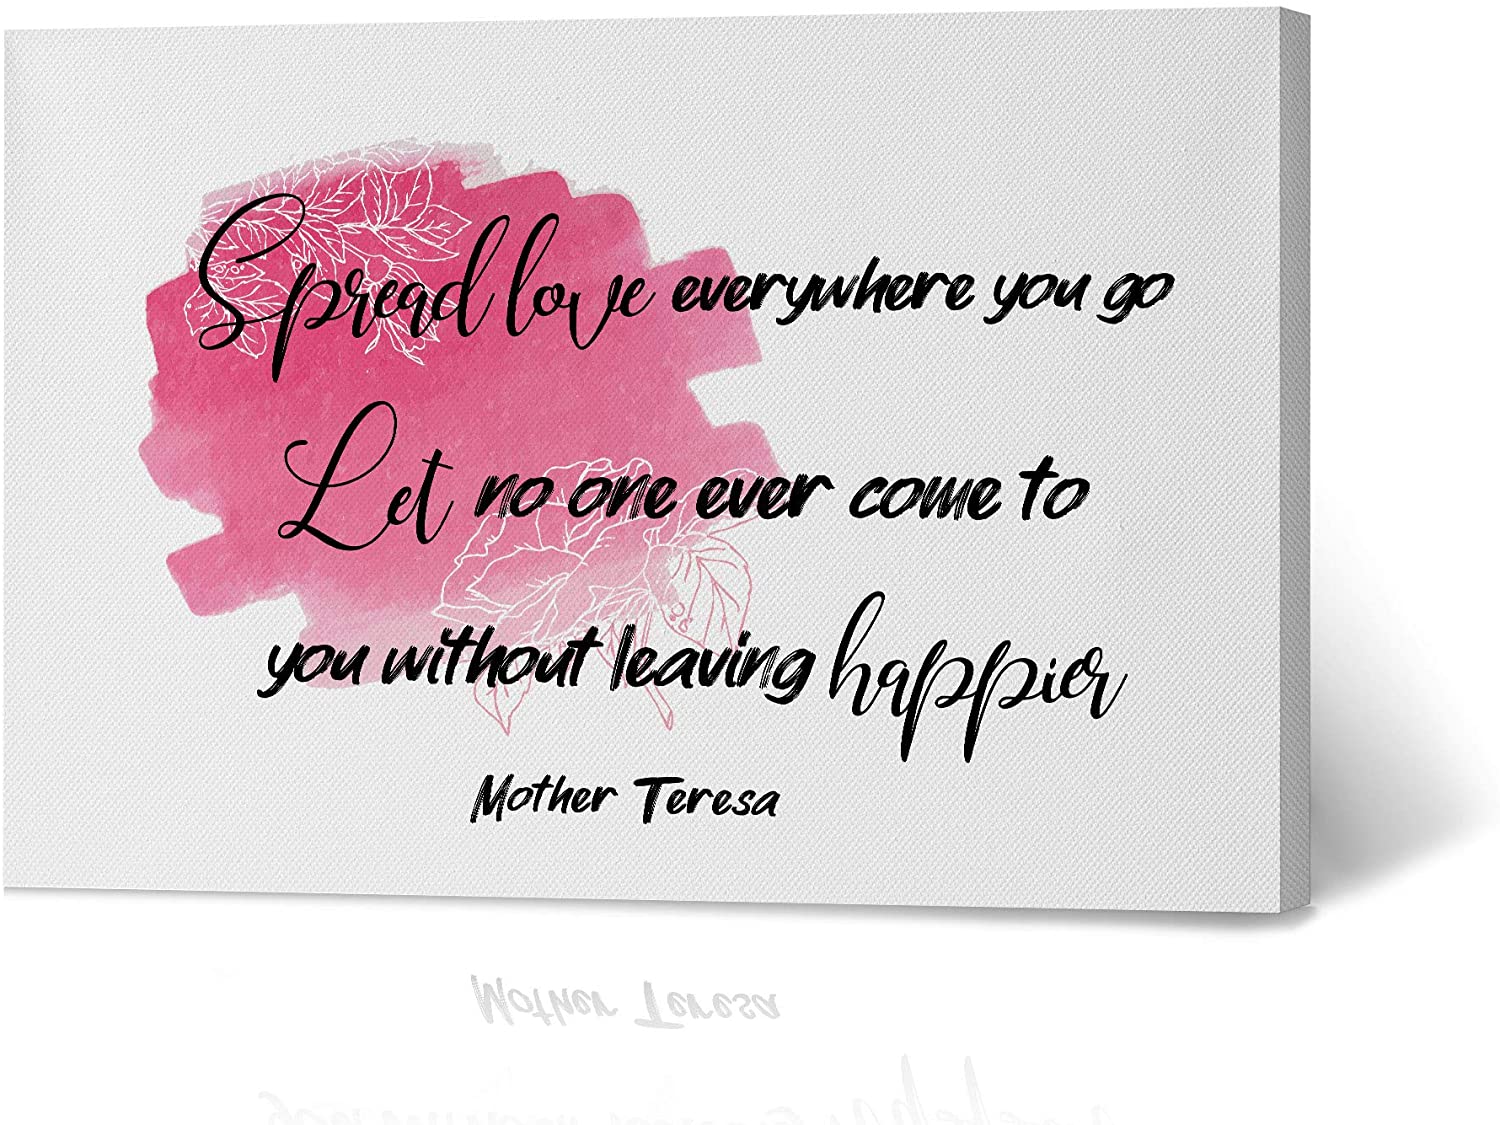 Detail Mother Teresa Quotes Spread Love Everywhere You Go Nomer 42